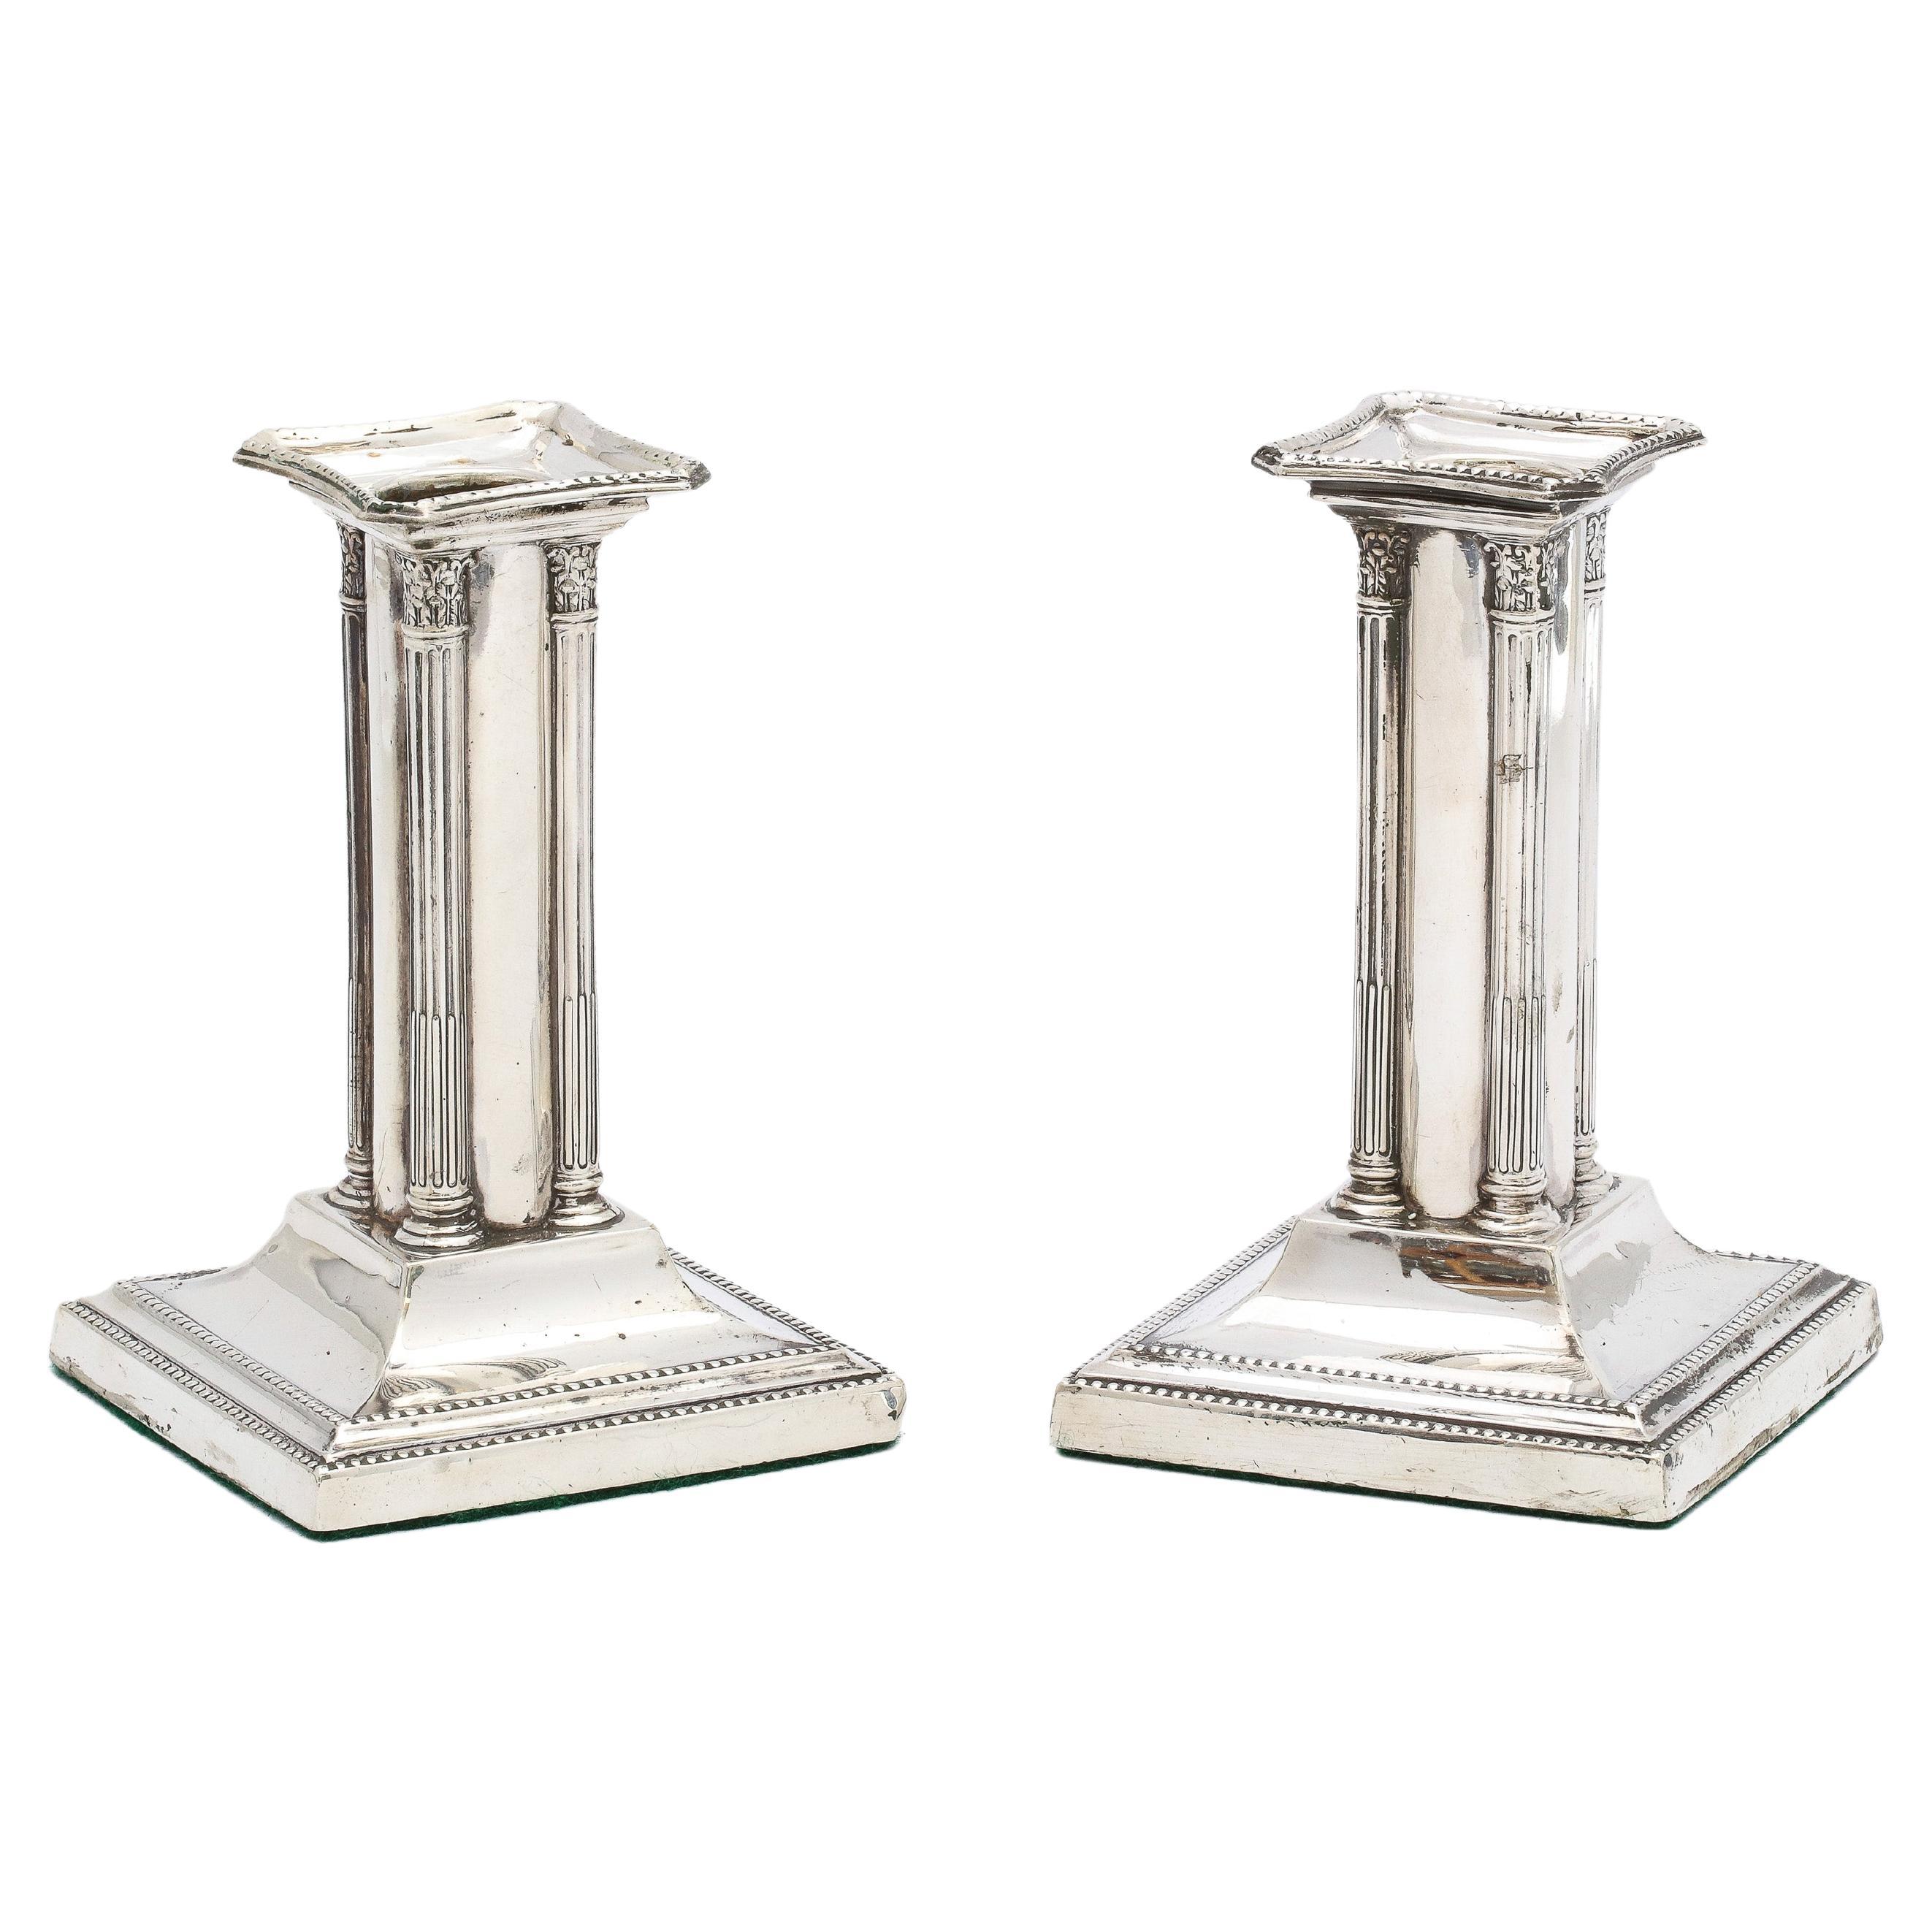 Unusual Pair of Edwardian Period Neoclassical Style Sterling Silver Candlesticks For Sale